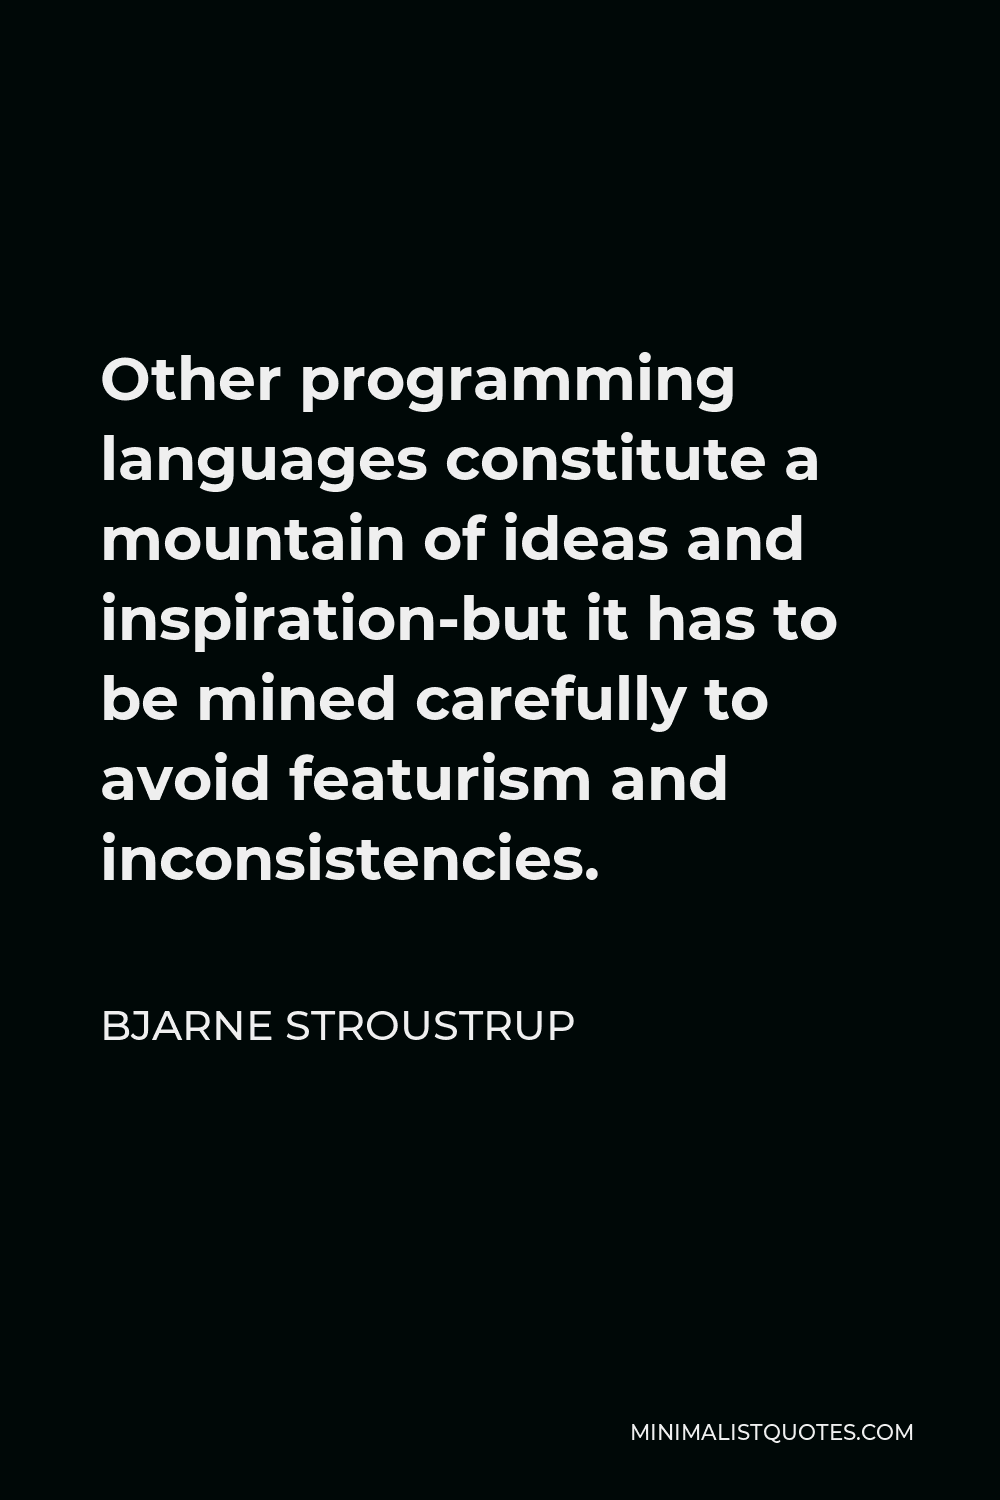 Bjarne Stroustrup Quote - Other programming languages constitute a mountain of ideas and inspiration-but it has to be mined carefully to avoid featurism and inconsistencies.